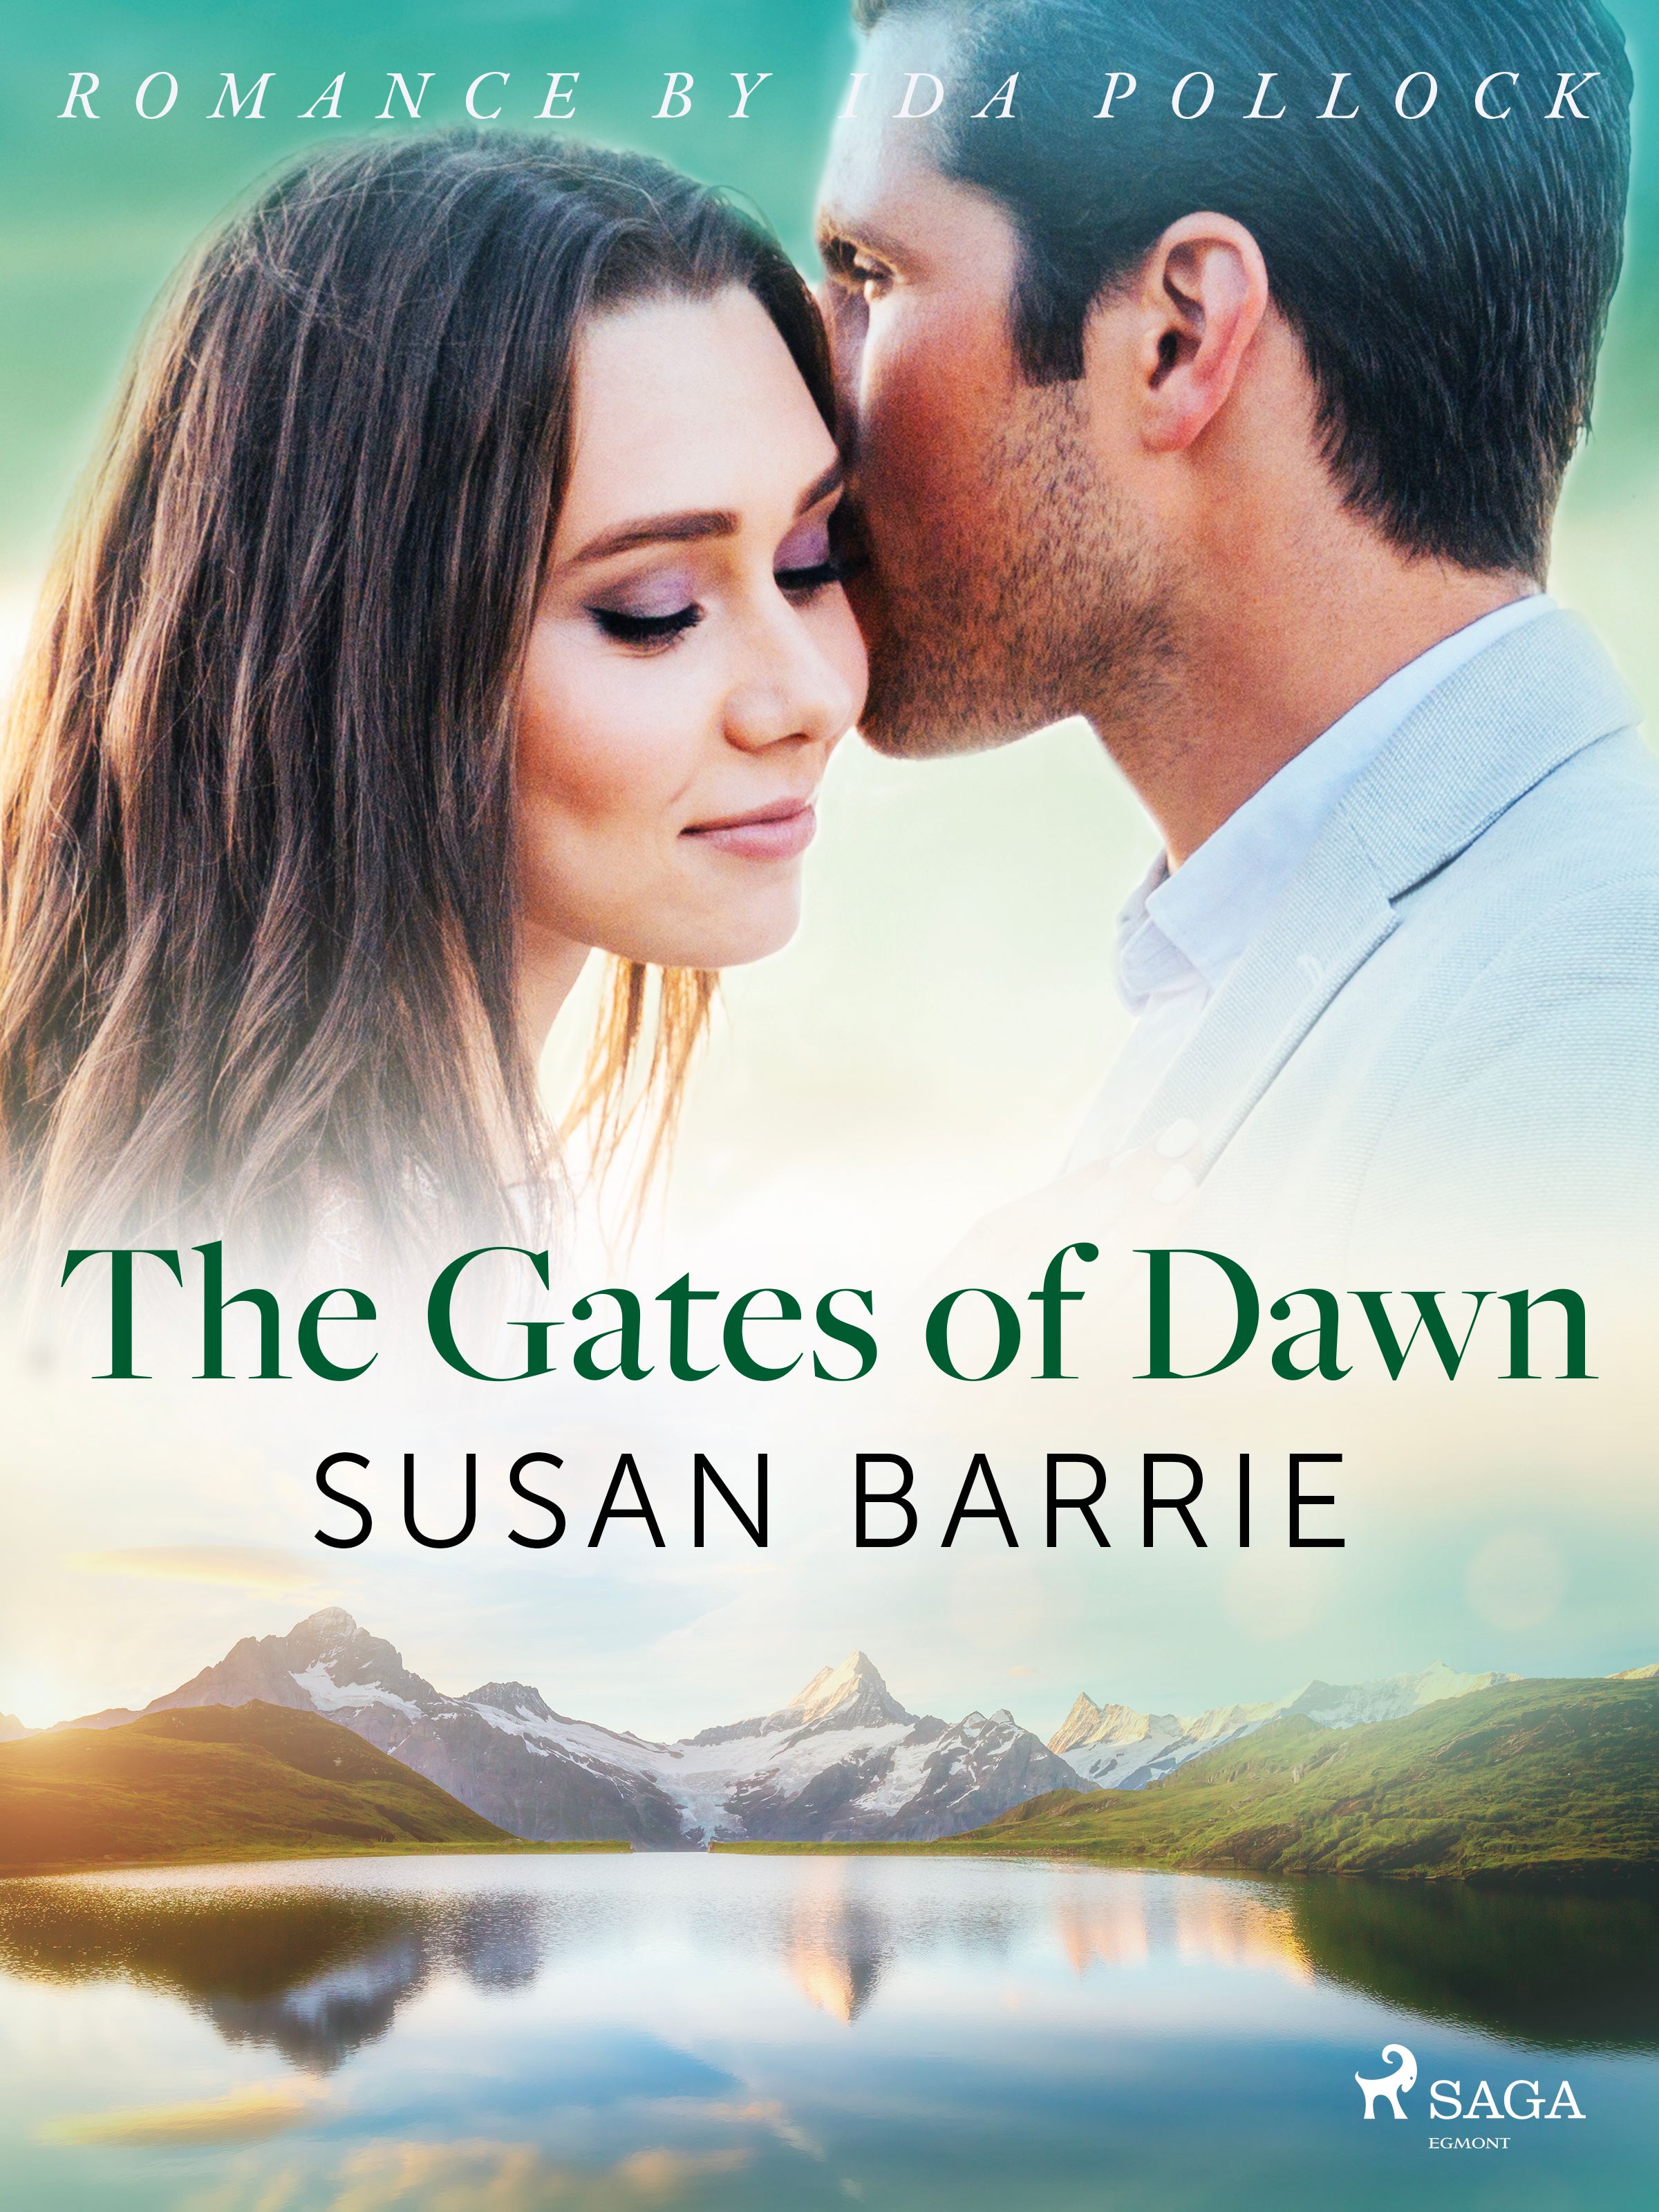 The Gates of Dawn, eBook by Susan Barrie